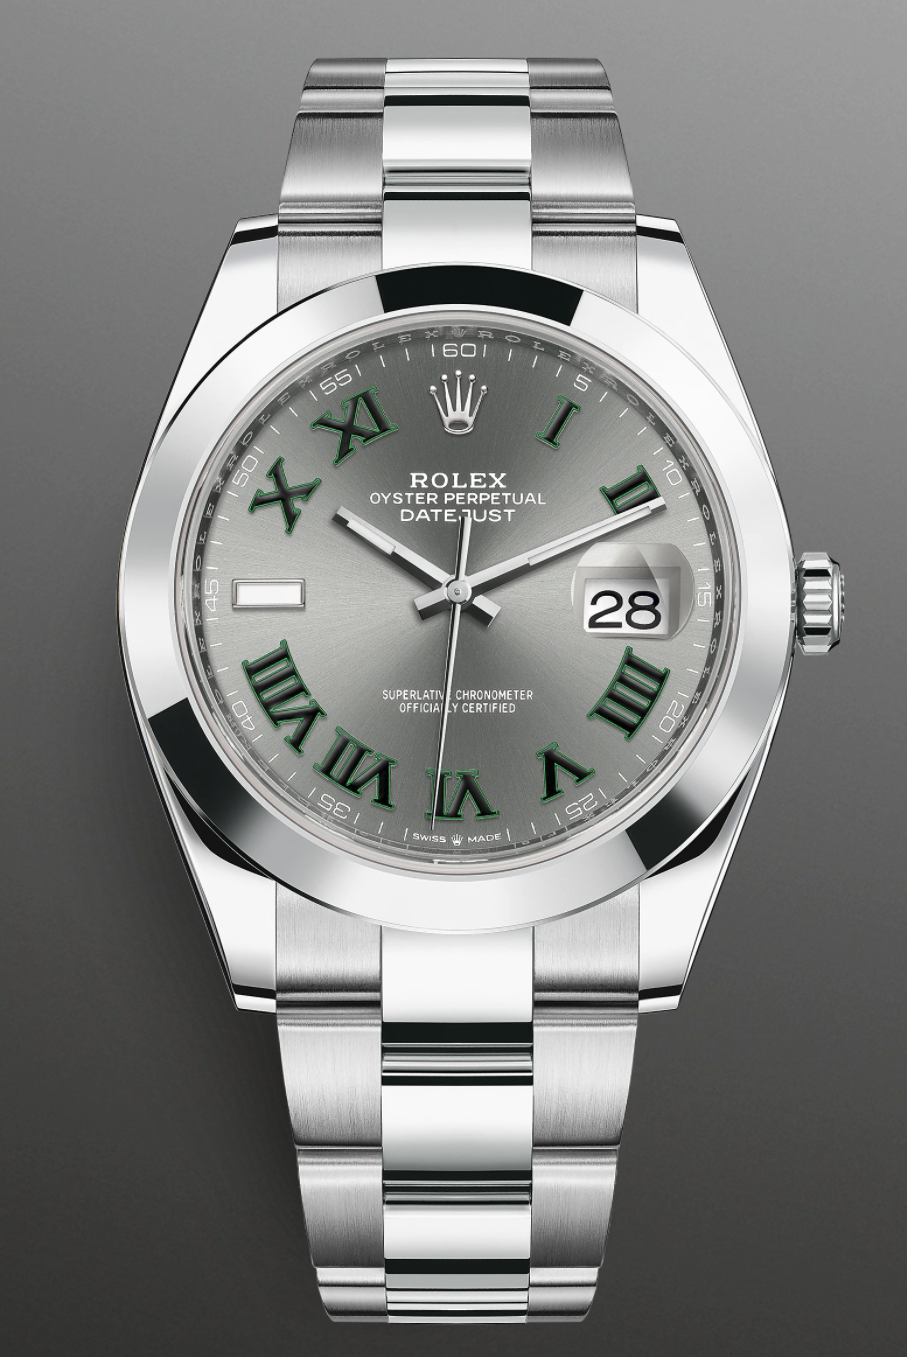 ** ON SALE ** Rolex DateJust Oyster Perpetual - OysterSteel - 41mm - Slate Dial - 2022 - Wimbledon